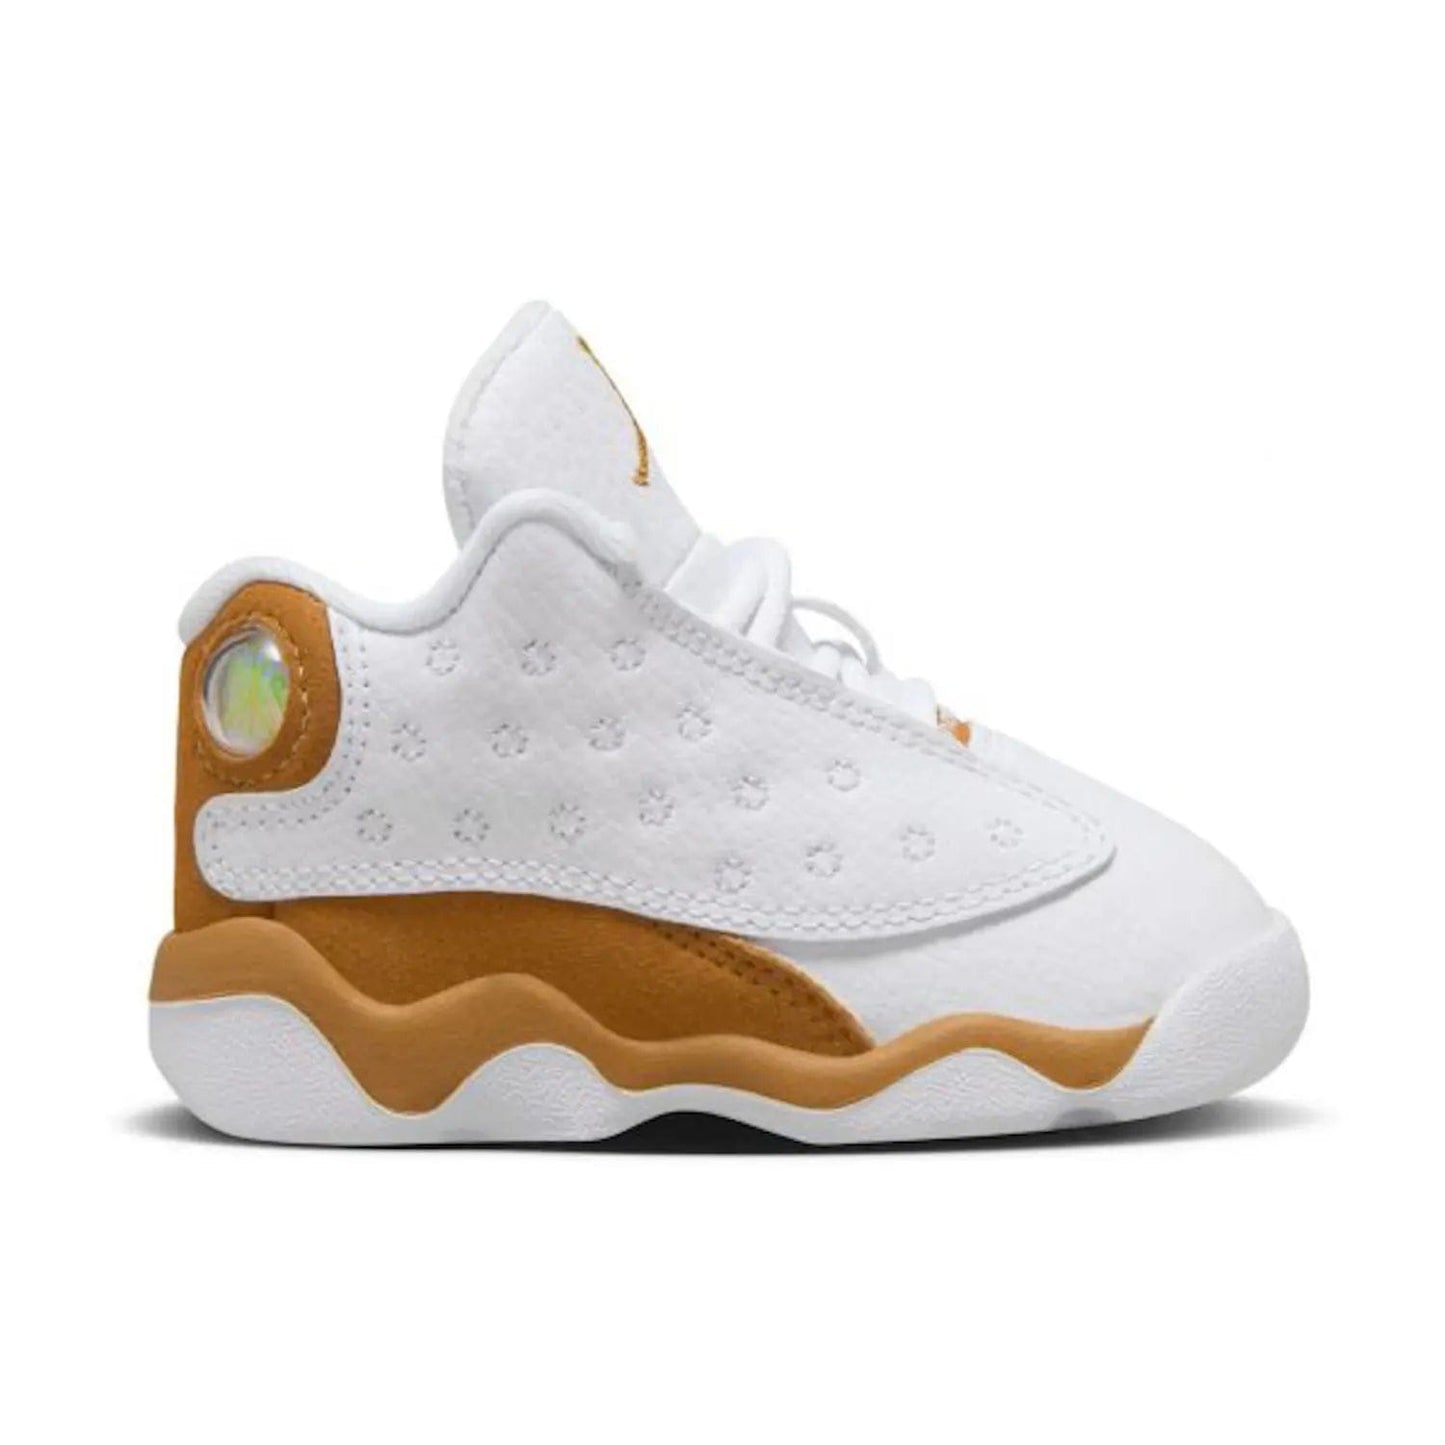 Jordan 13 Retro Wheat (2023) (TD) - Image 1 - Only at www.BallersClubKickz.com - Must-have Jordan 13 Retro Wheat shoes! White-based upper with wheat details for a stylish finish. Midfoot support and cushioning for a comfortable fit every time. Pre-order now and step out in style!